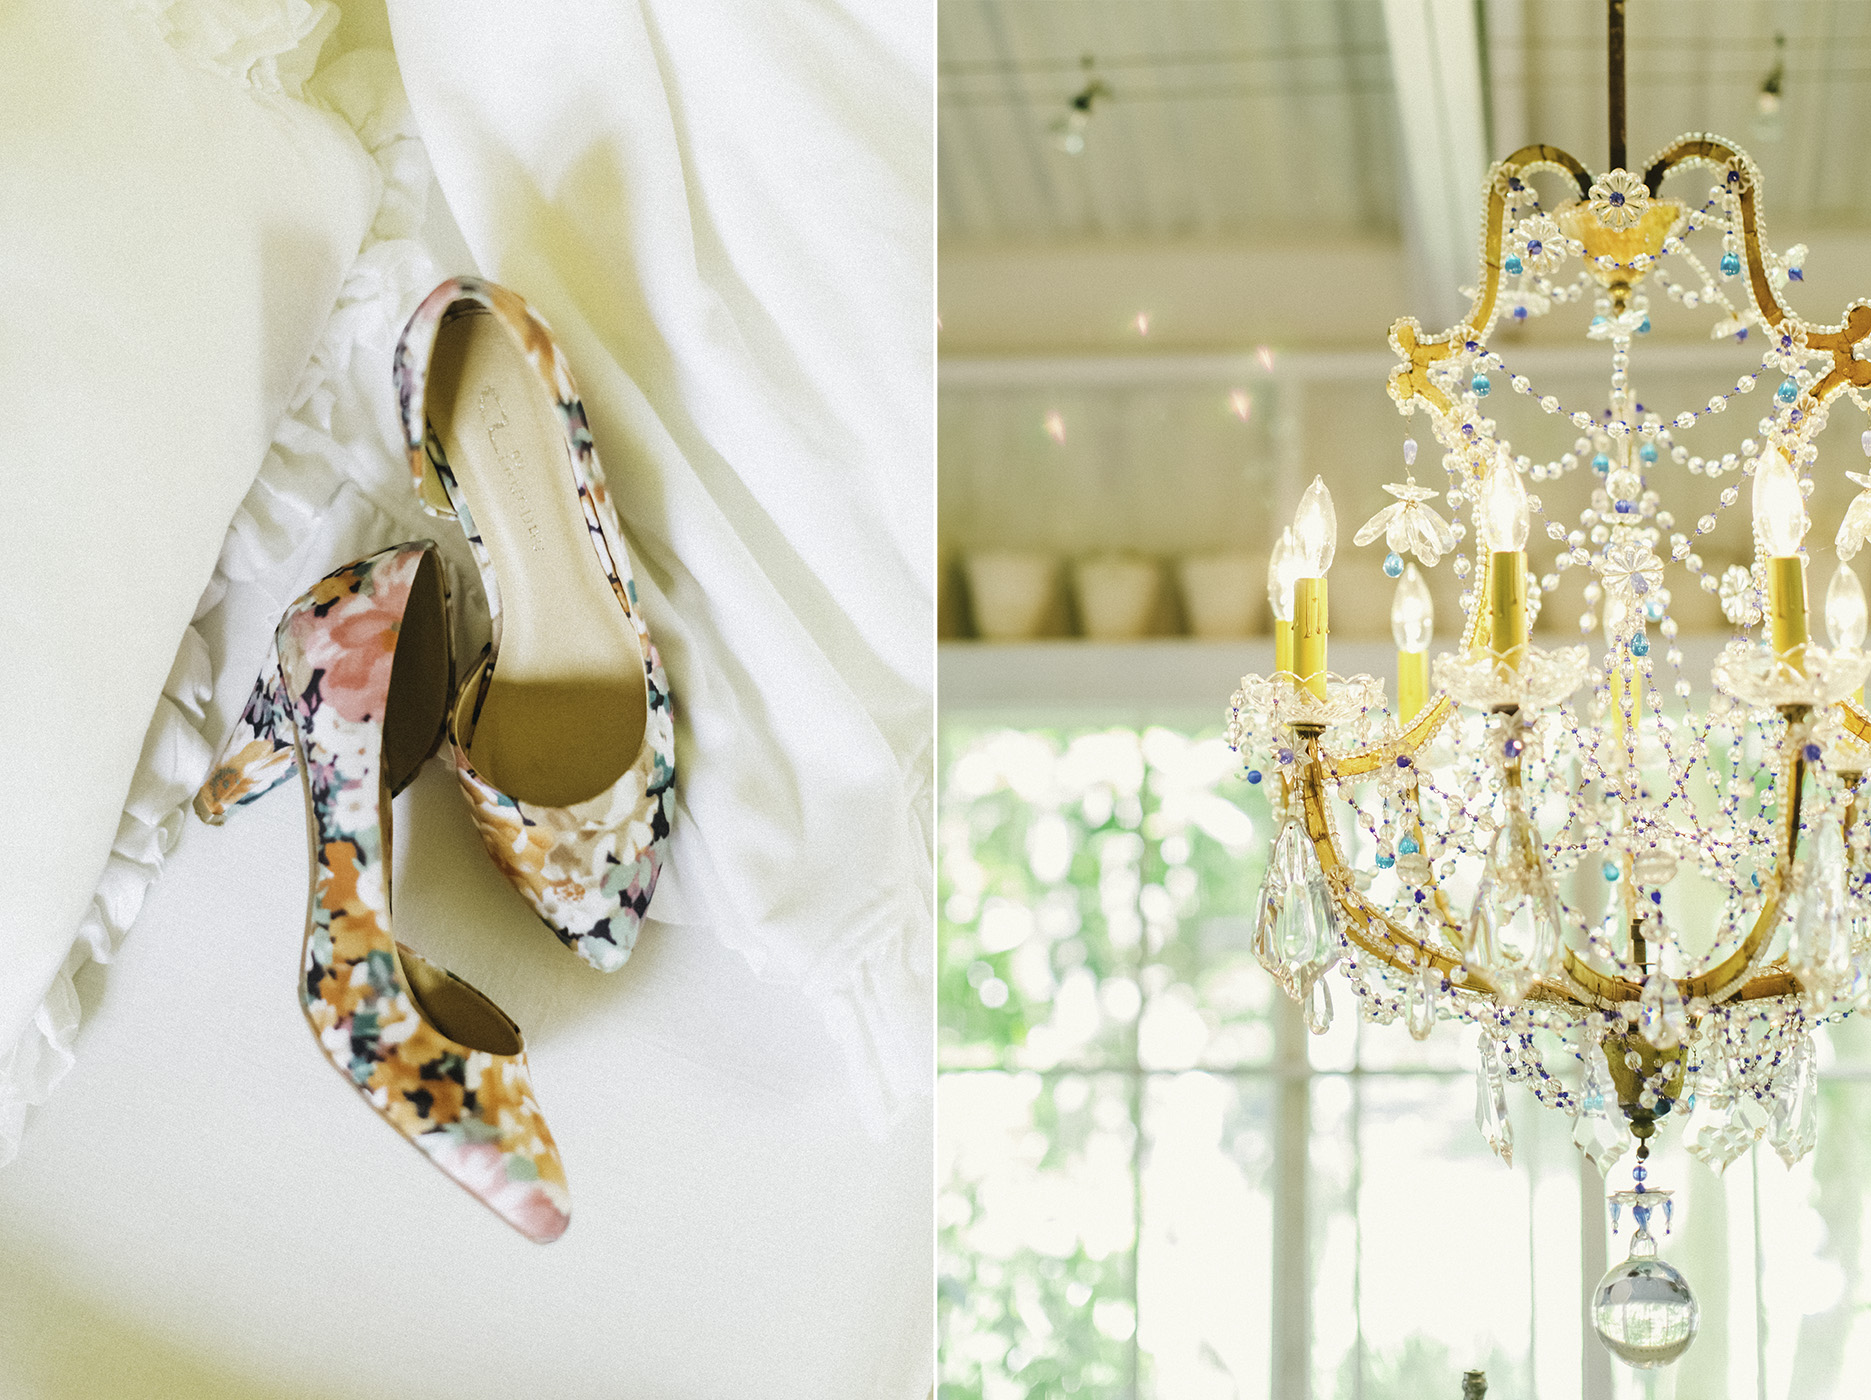 exquisite little details shoes and chandelier